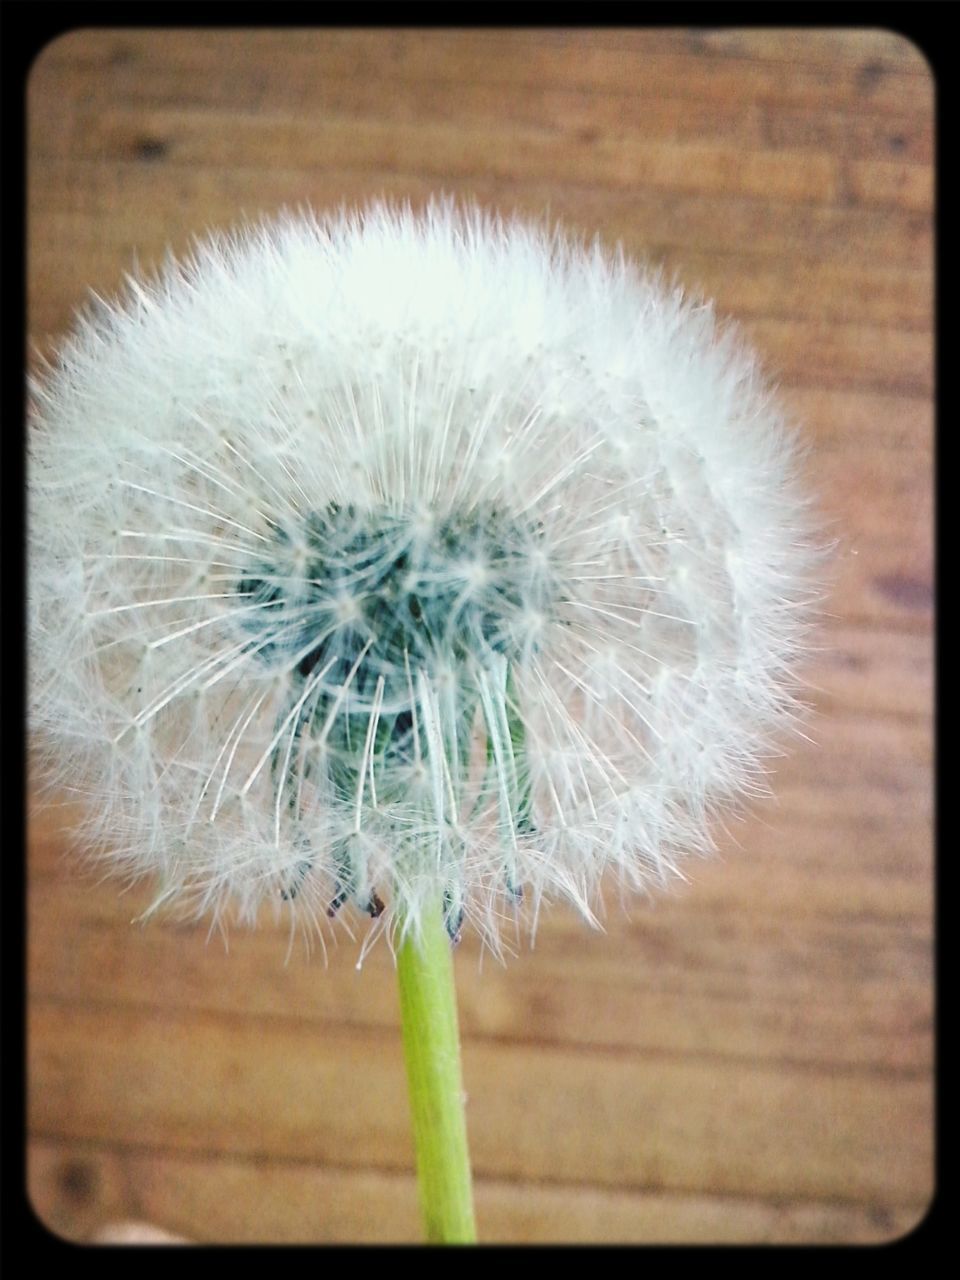 dandelion, flower, flower head, fragility, freshness, single flower, close-up, growth, beauty in nature, nature, softness, white color, uncultivated, seed, stem, focus on foreground, dandelion seed, simplicity, wildflower, white